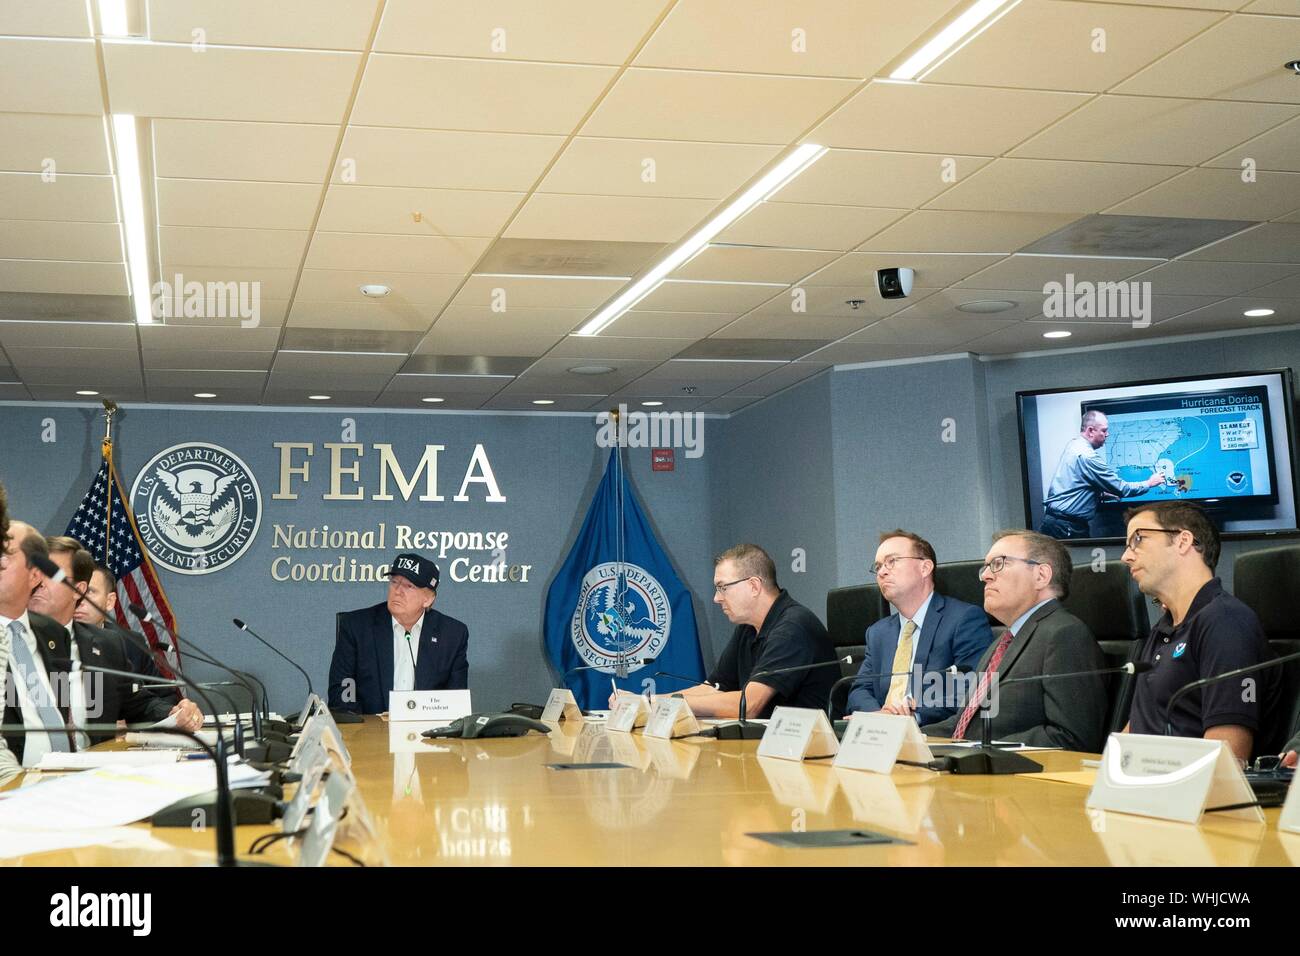 Washington, DC, USA, 01 September, 2019. U.S. President Donald Trump attends a briefing on catastrophic Hurricane Dorian at the Federal Emergency Management Agency September 1, 2019 in Washington, D.C.  Dorian struck the Bahamas as a Category 5 storm with winds of 185 mph and is now approaching Florida. Credit: Shealah Craighead/Planetpix/Alamy Live News Stock Photo